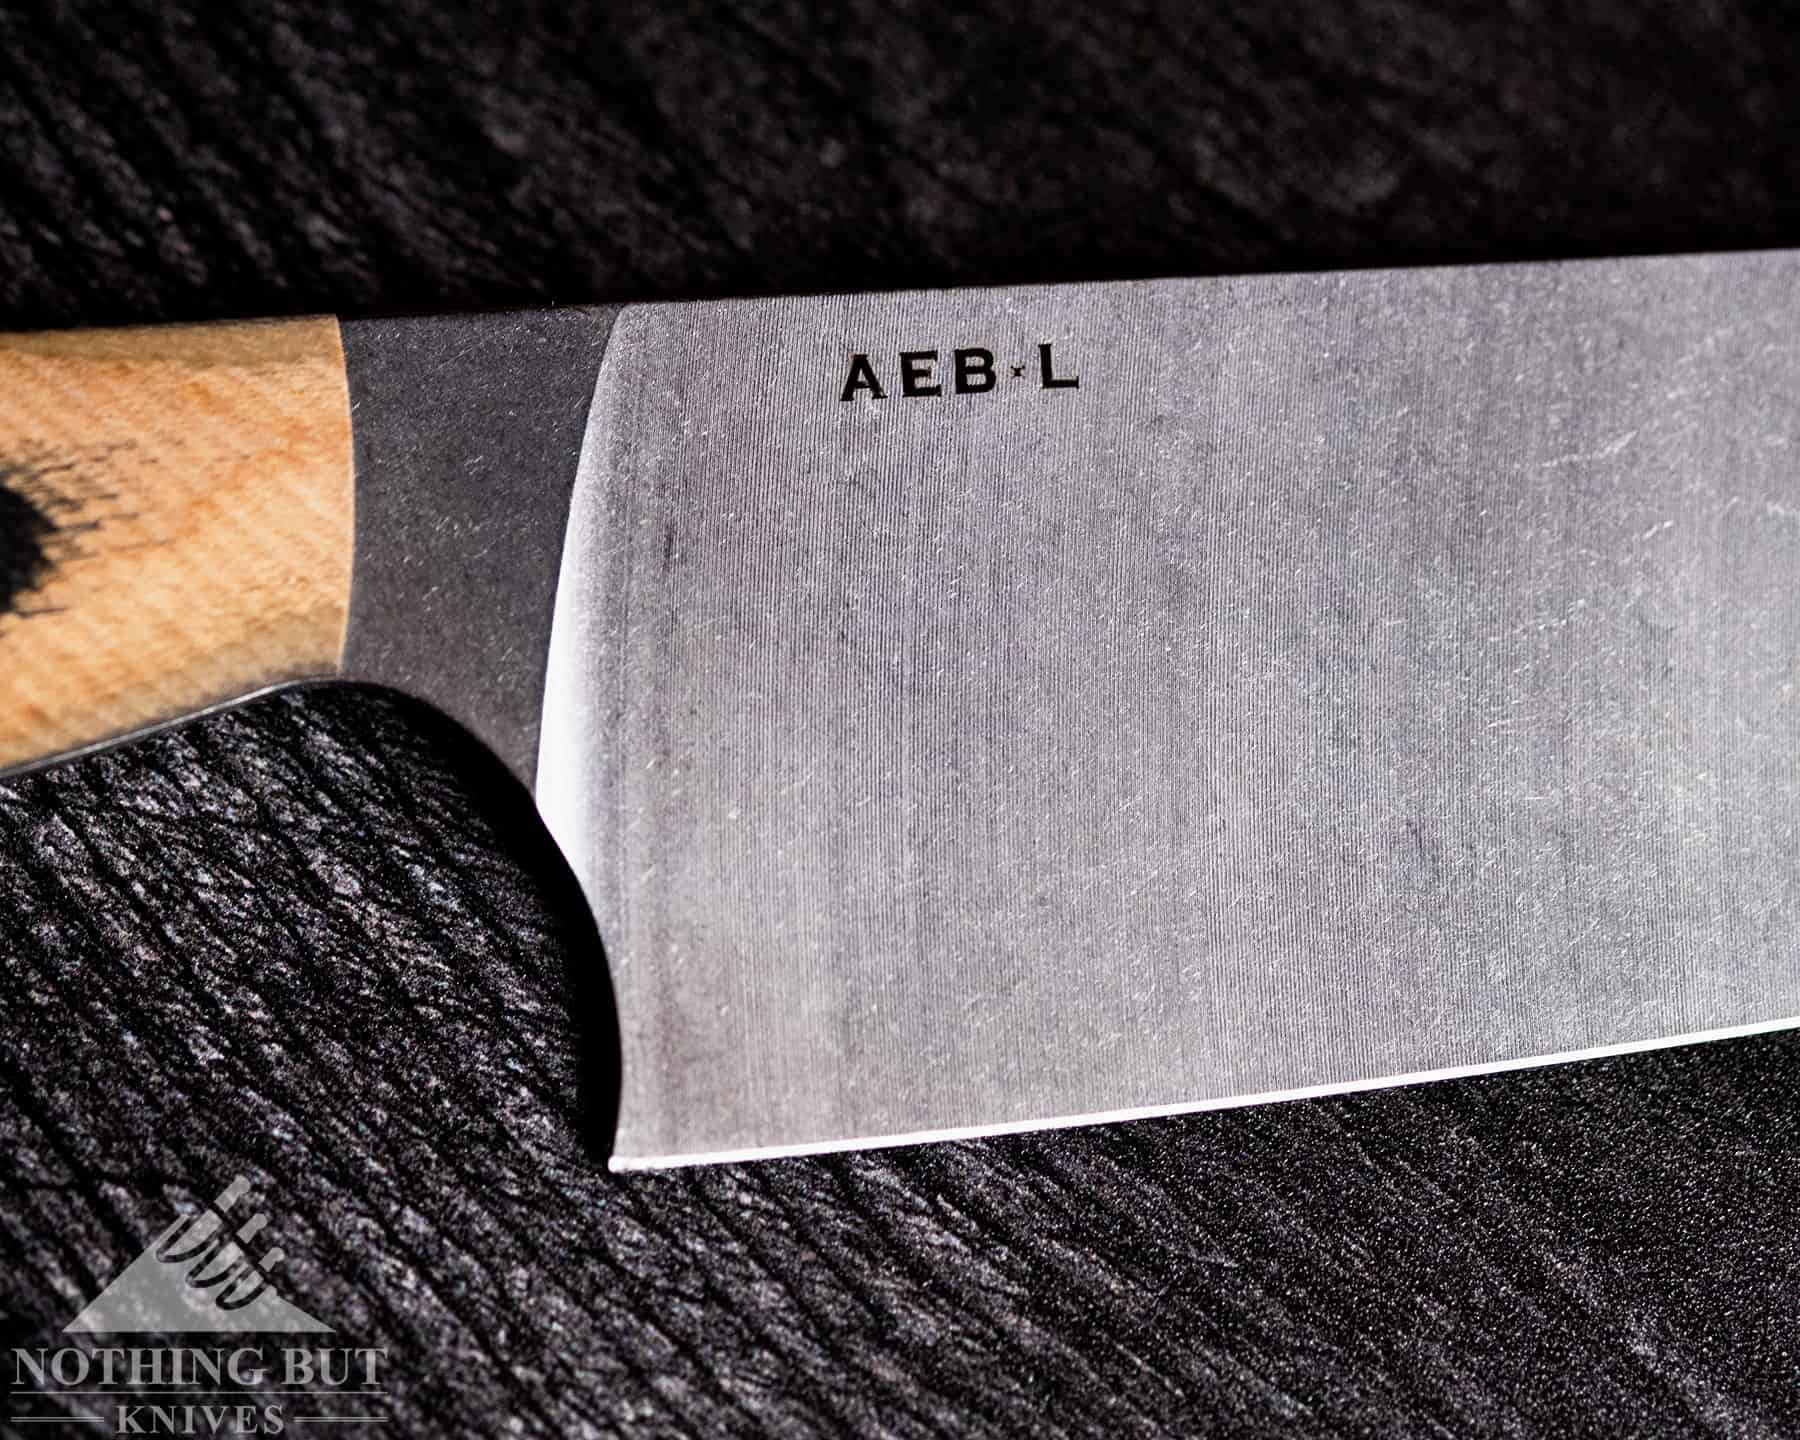 AEB-L Steel is a decent choice for kitchen cutlery.